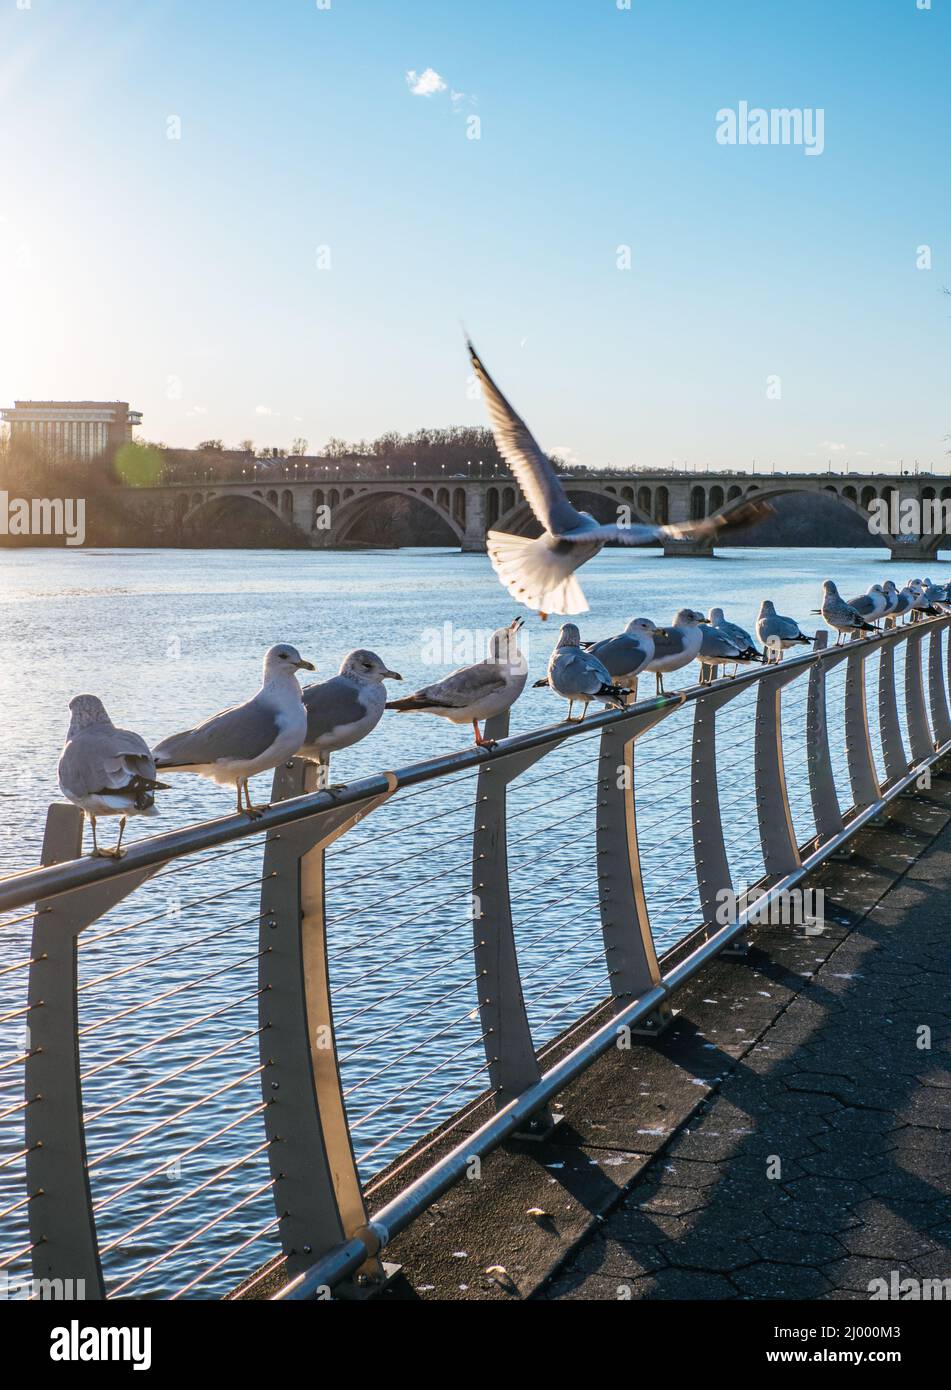 Seagulls at the Georgetown waterfront in Washington DC, United States Stock Photo